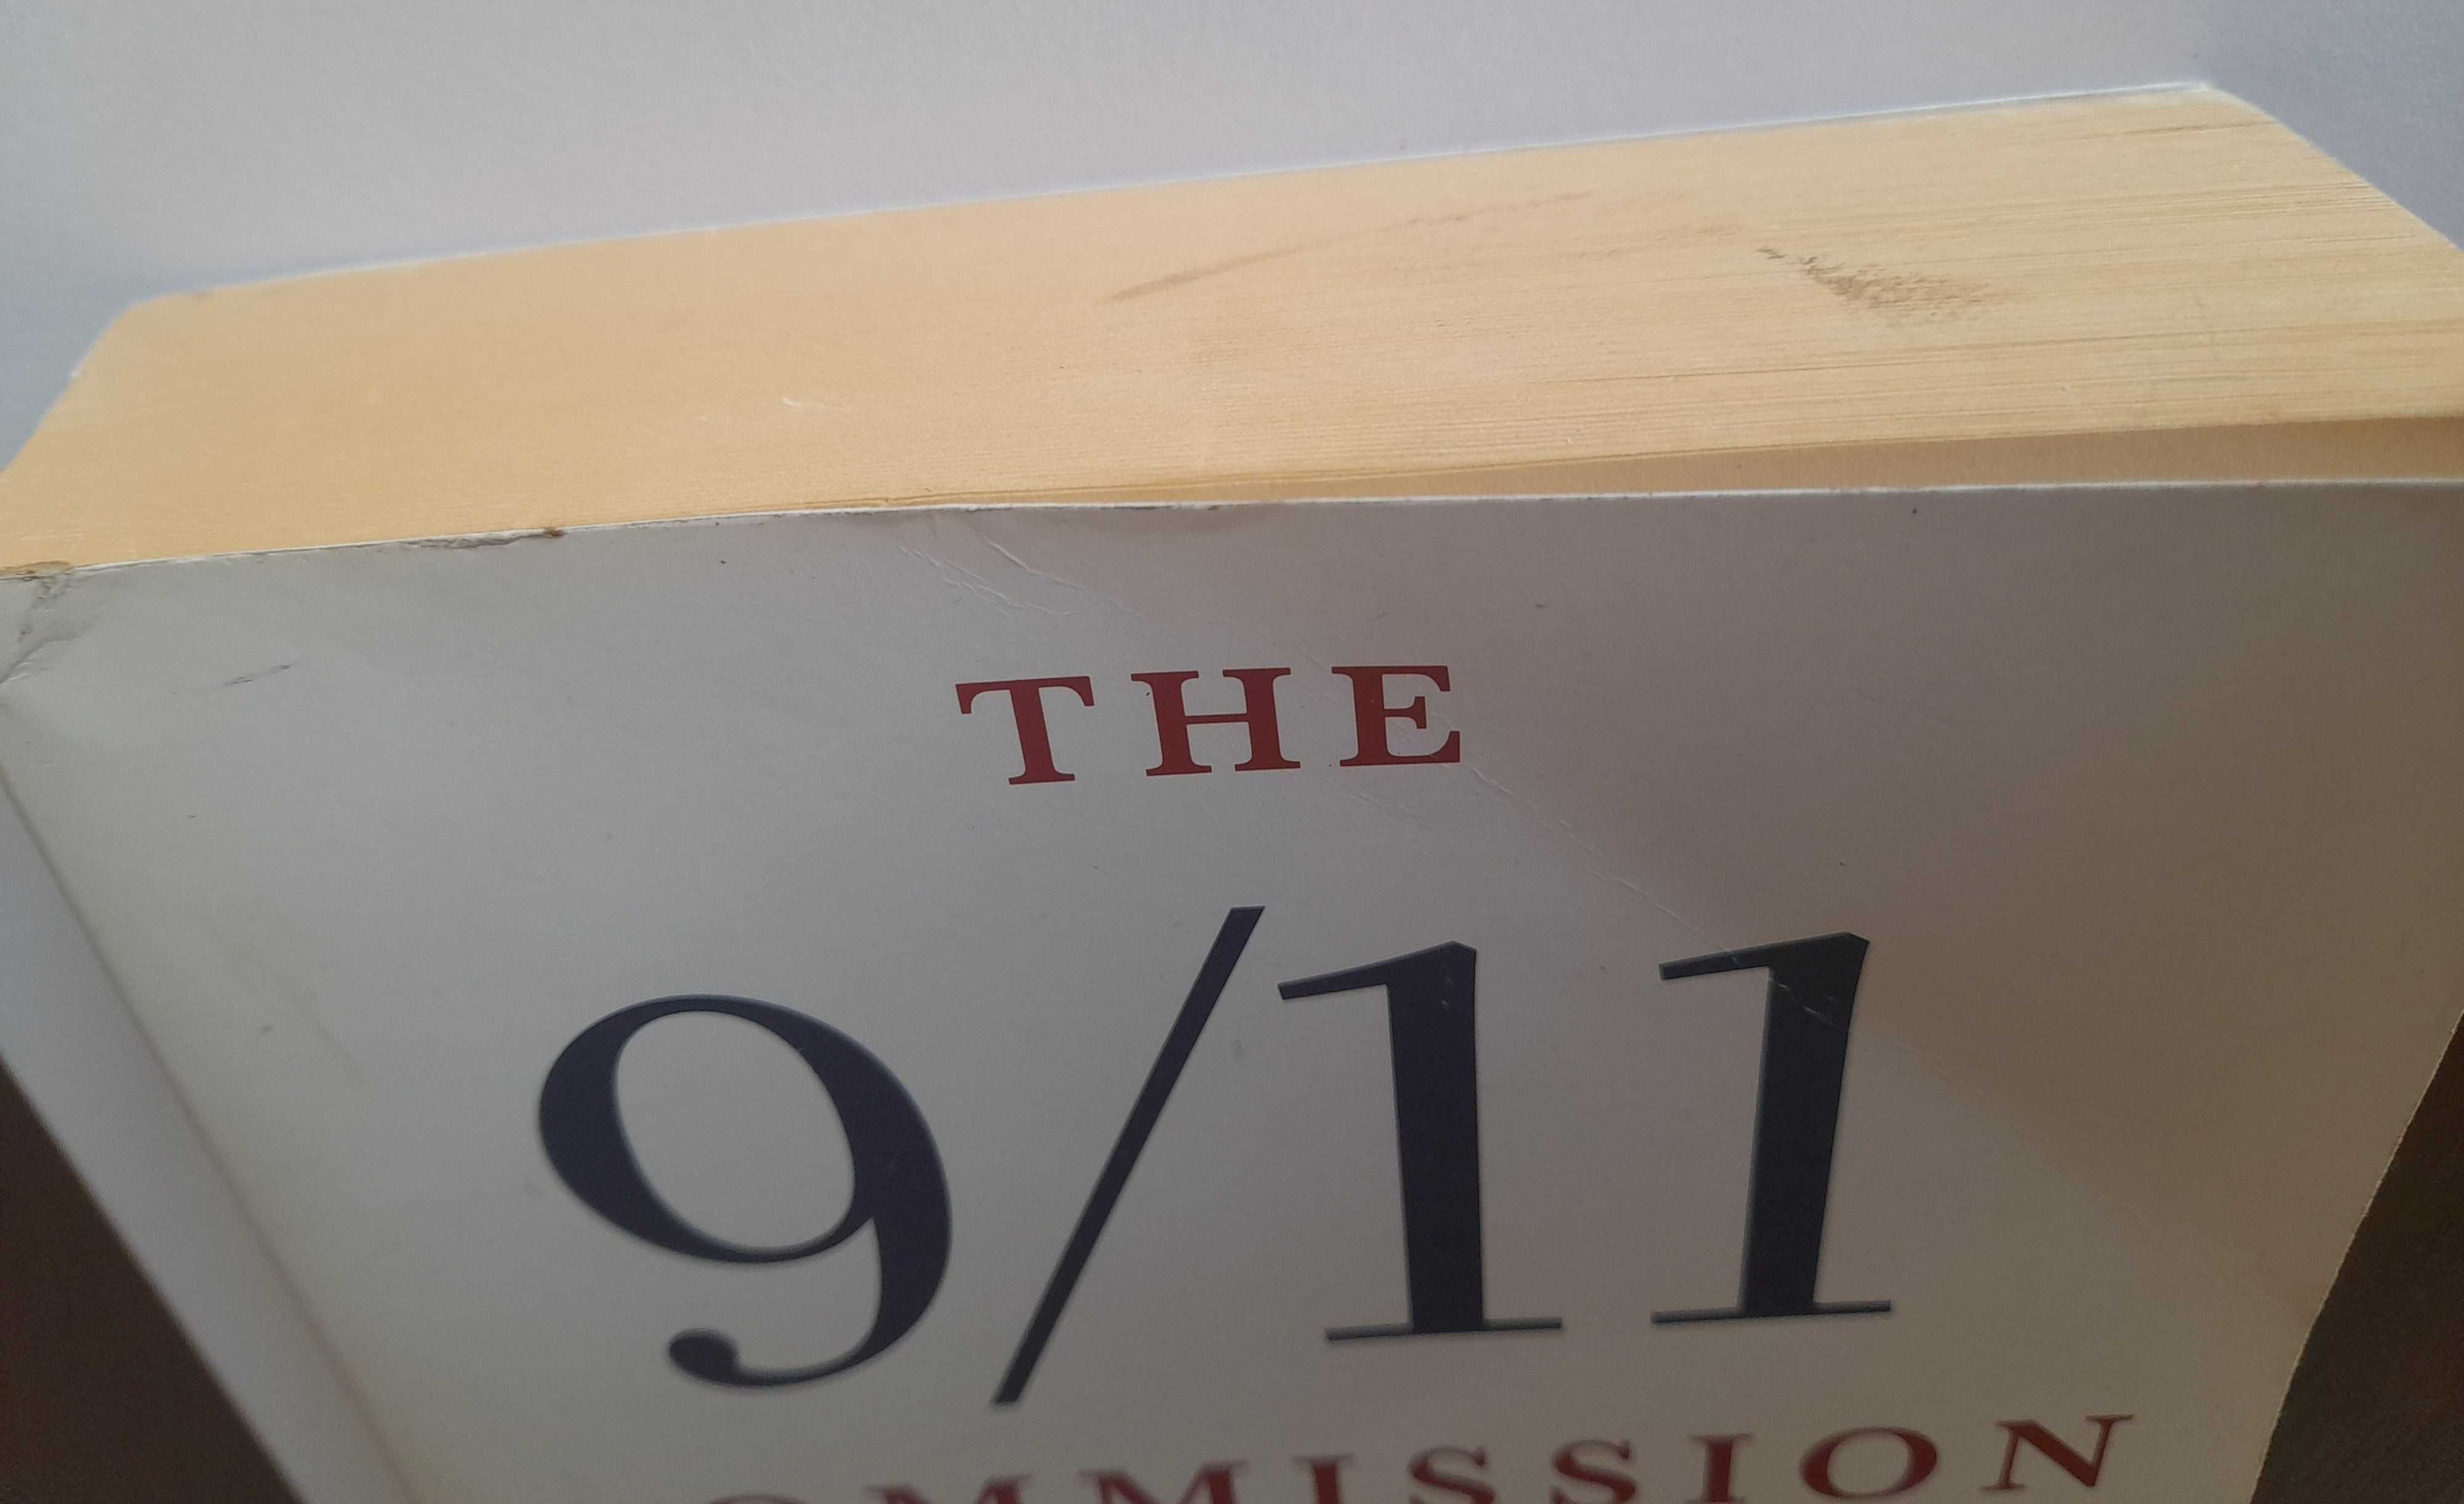 The 9/11 Commission Report